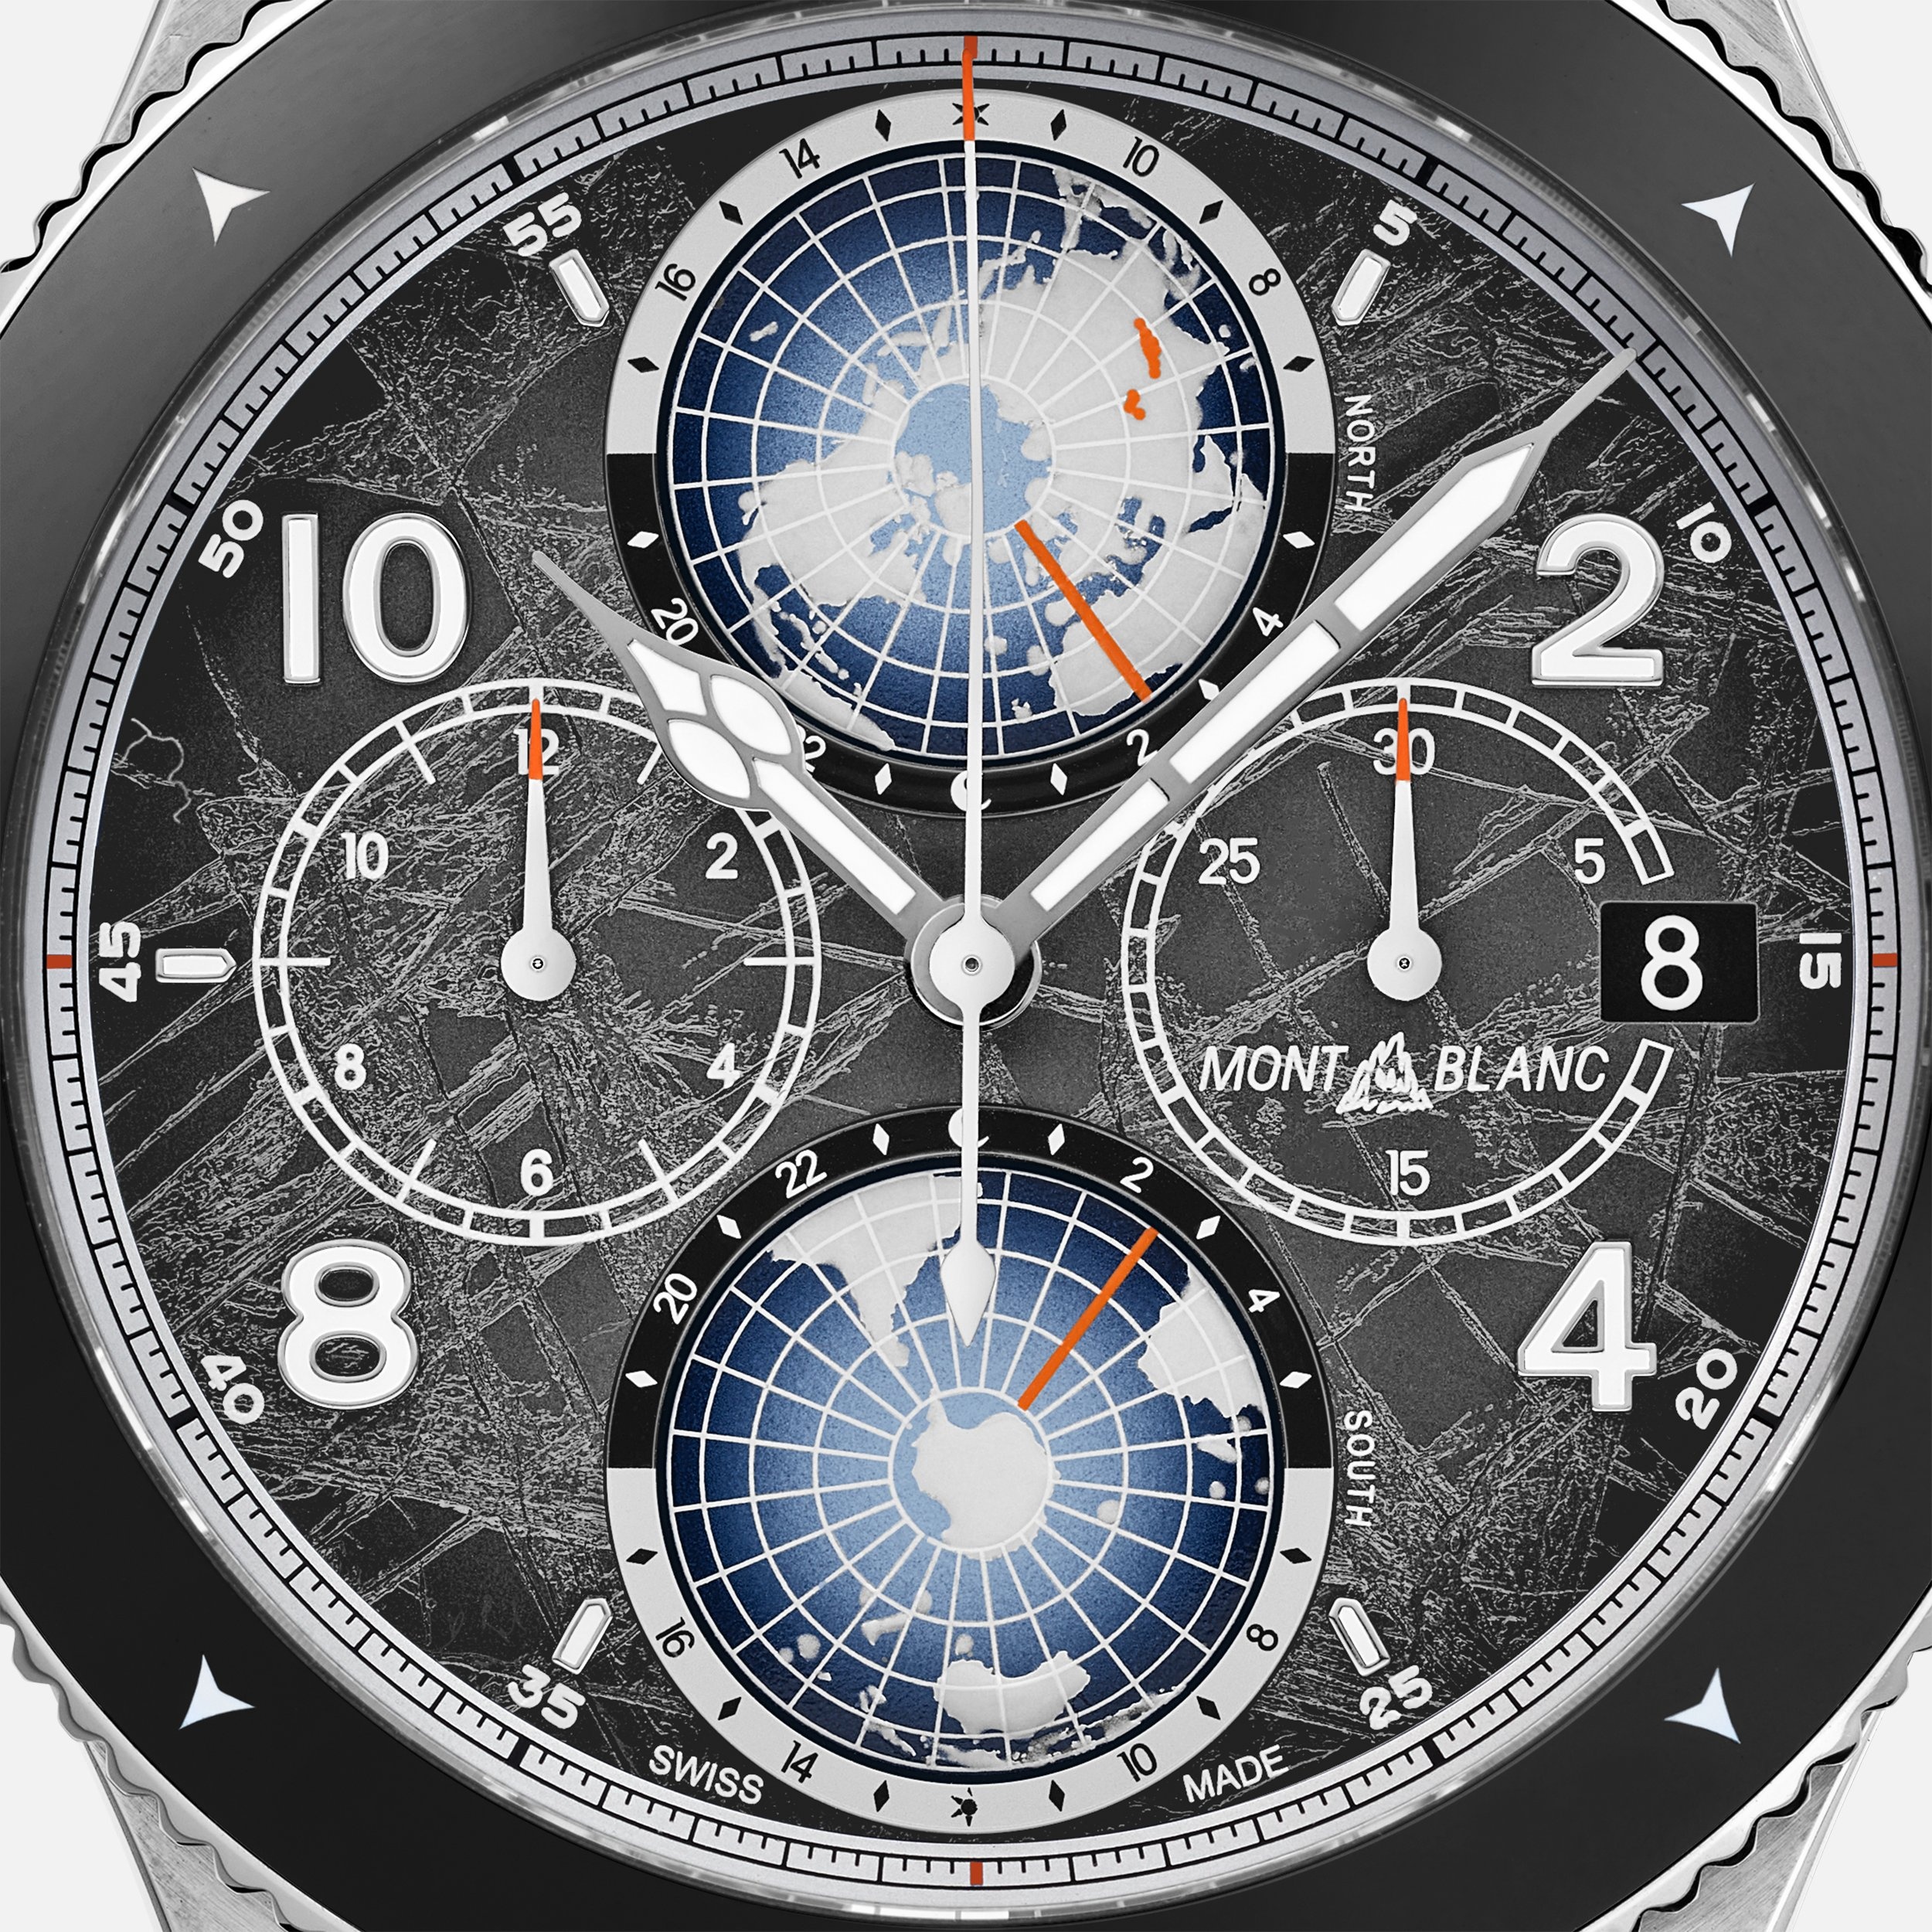 Montblanc 1858 Geosphere Chronograph 0 Oxygen The 8000 Limited Edition - 290 pieces - 5